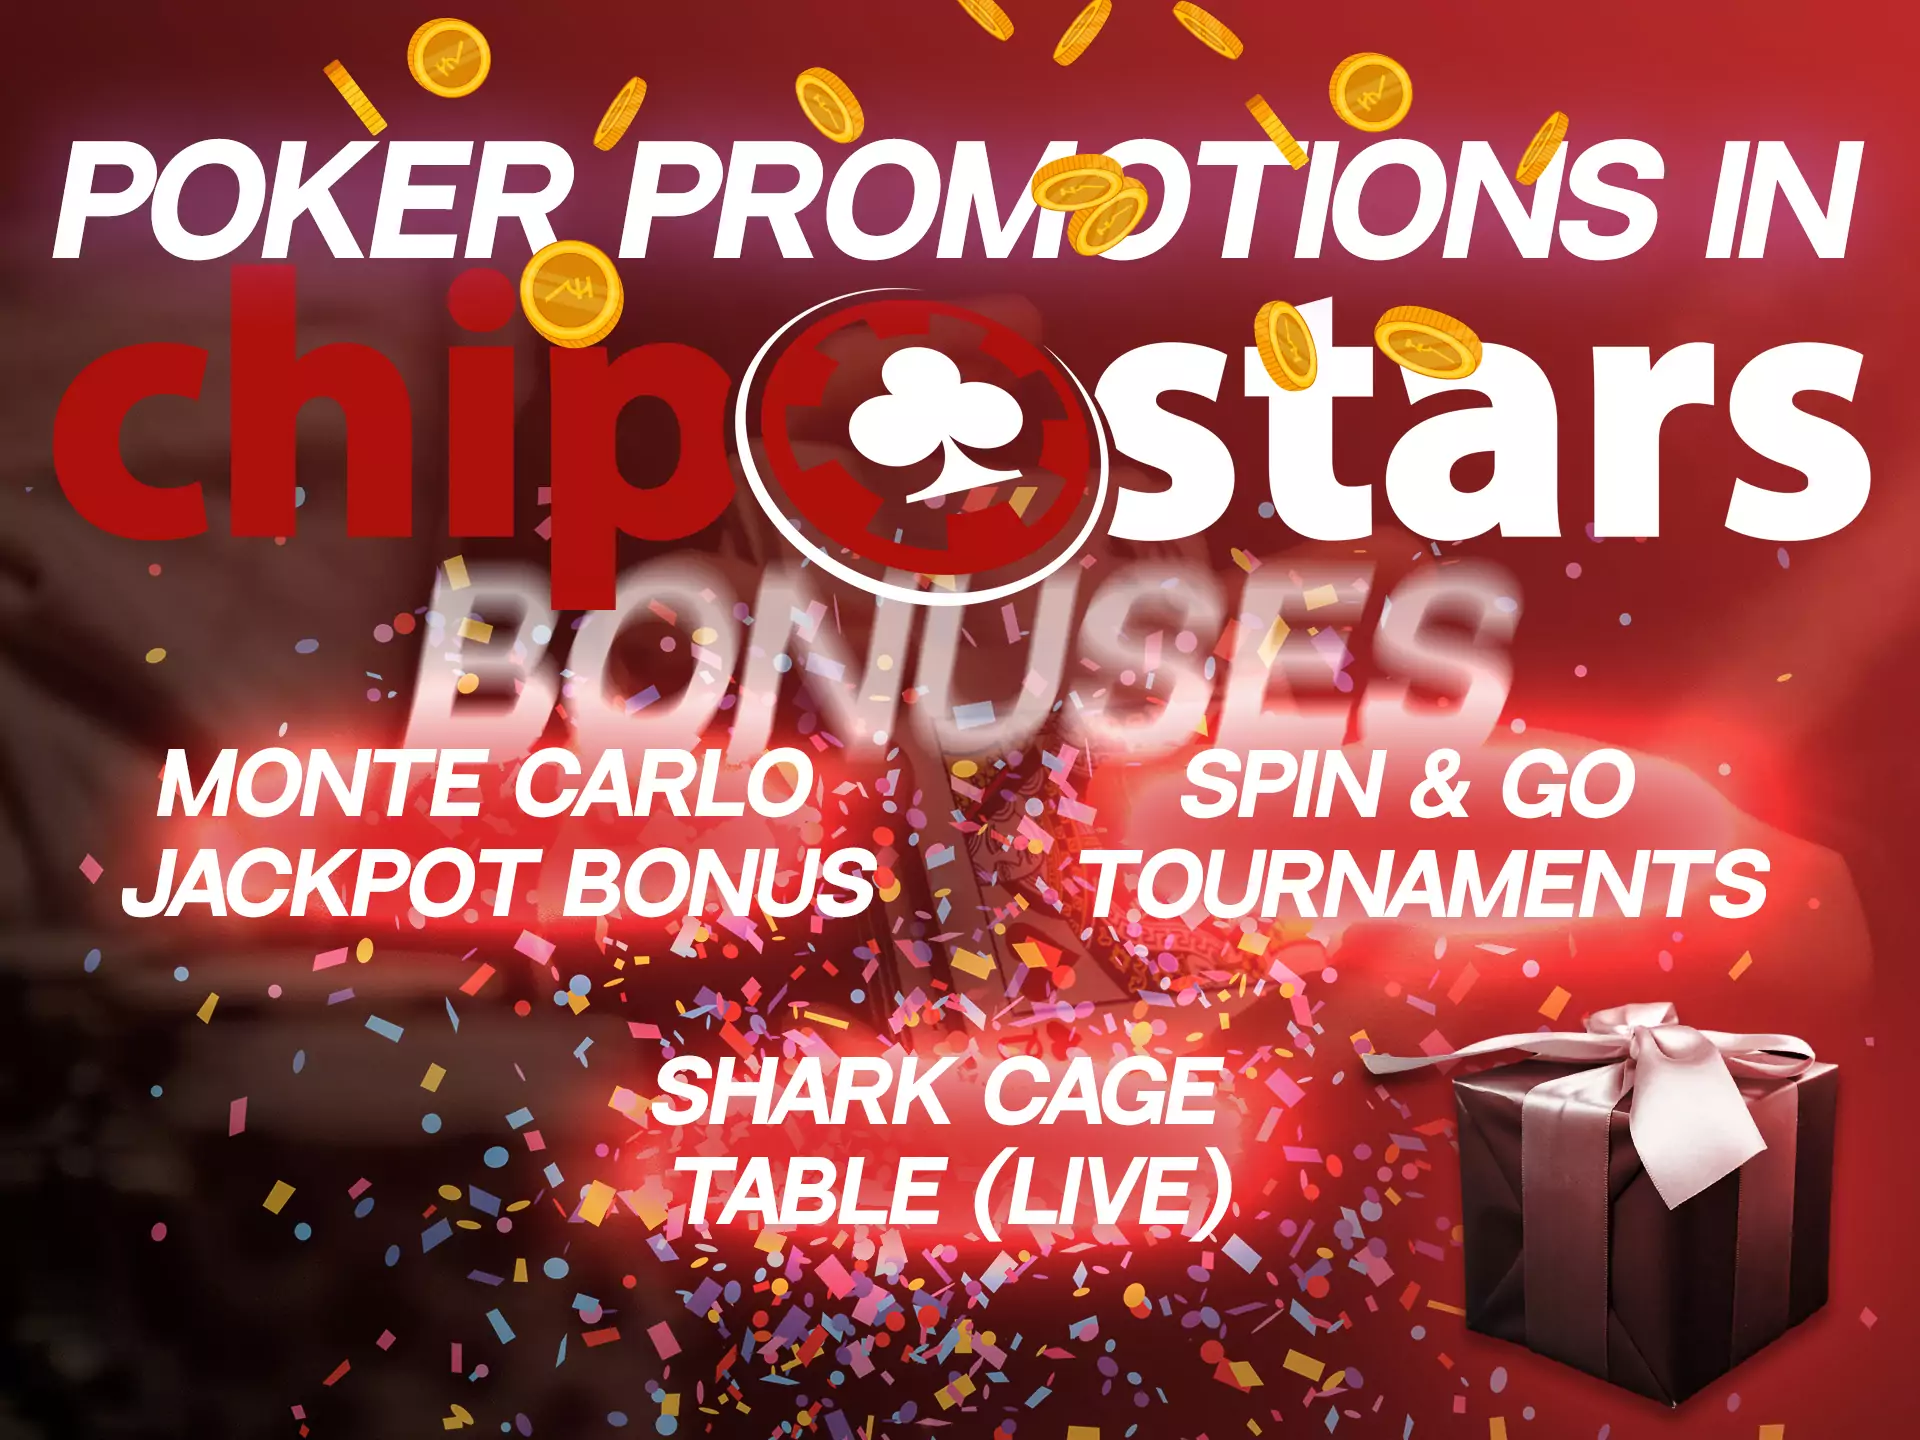 Poker fans get special bonuses for playing casino games on the Chipstars mobile website.